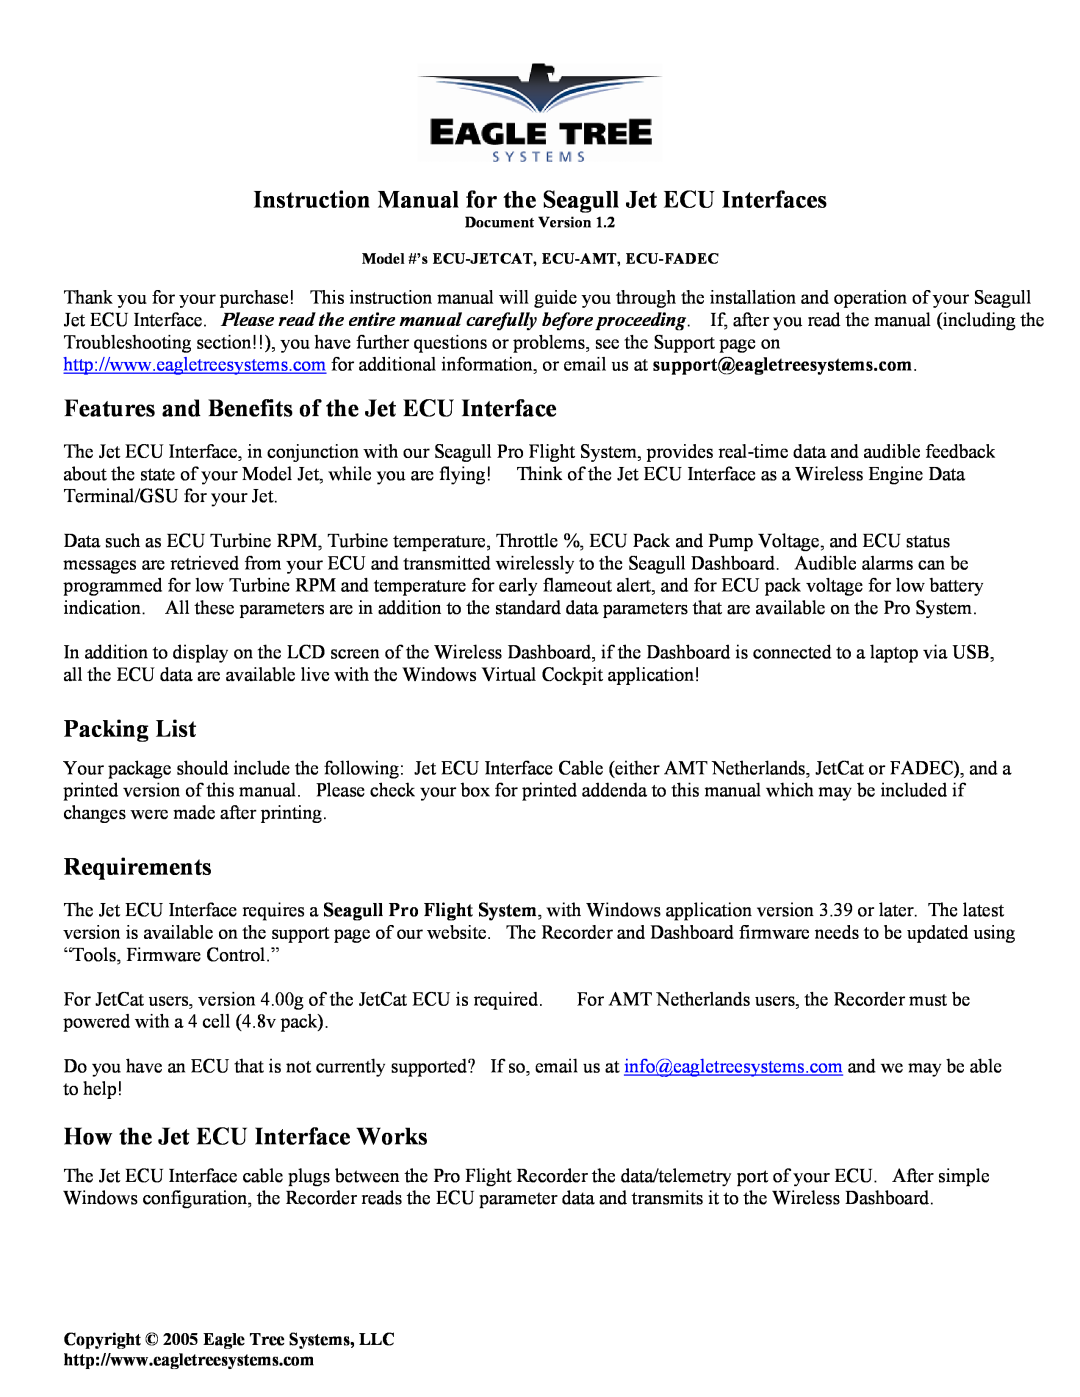 Eagle Tree Systems ECU-JETCAT manual Instruction Manual for the Seagull Jet ECU Interfaces, Packing List, Requirements 